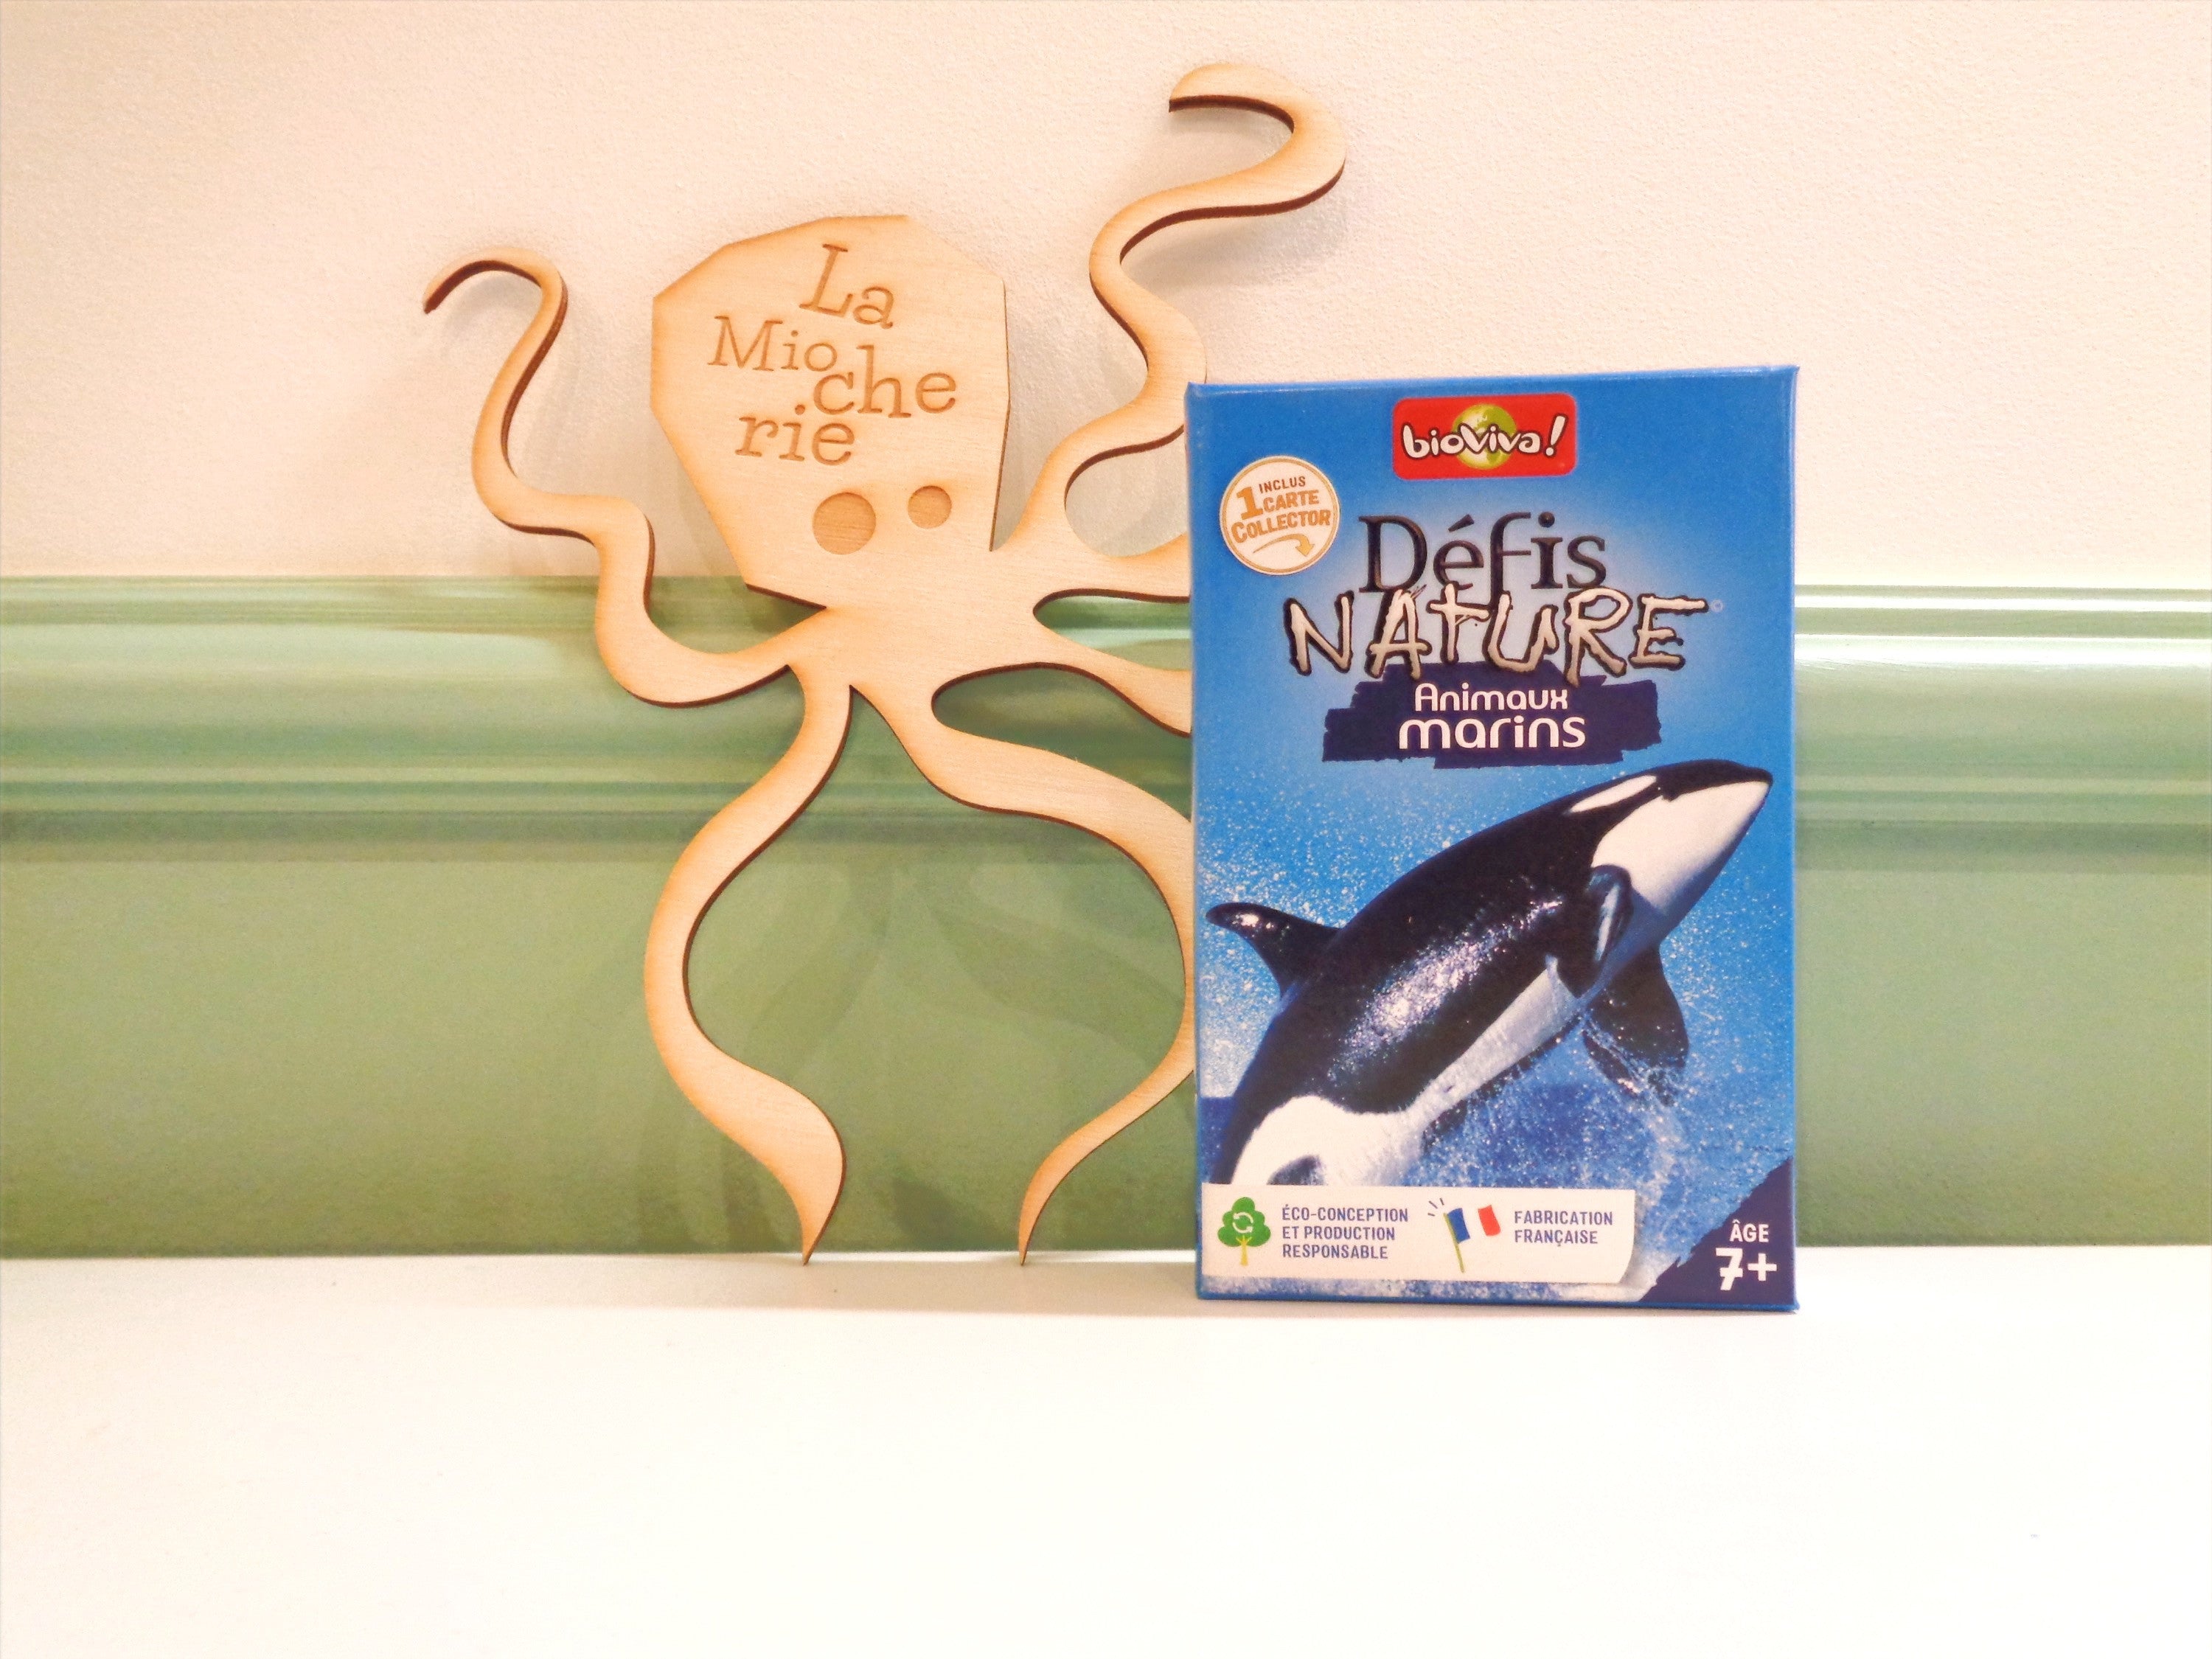 Défis Nature Animaux Marins - Made in France - Bioviva